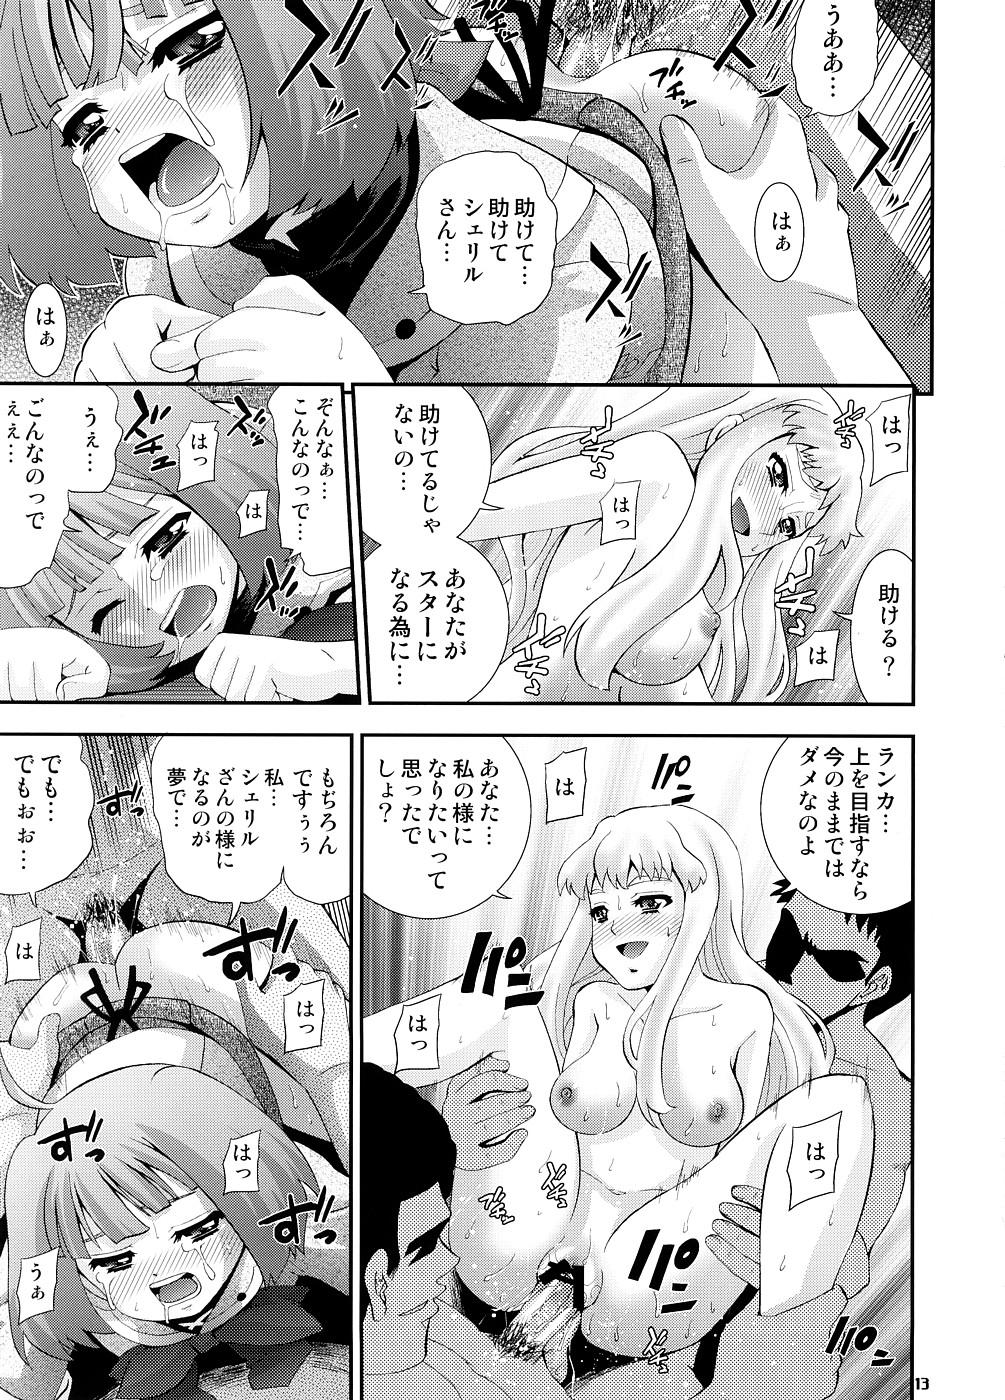 Ejaculation Song Bird - Macross frontier Tinytits - Page 12